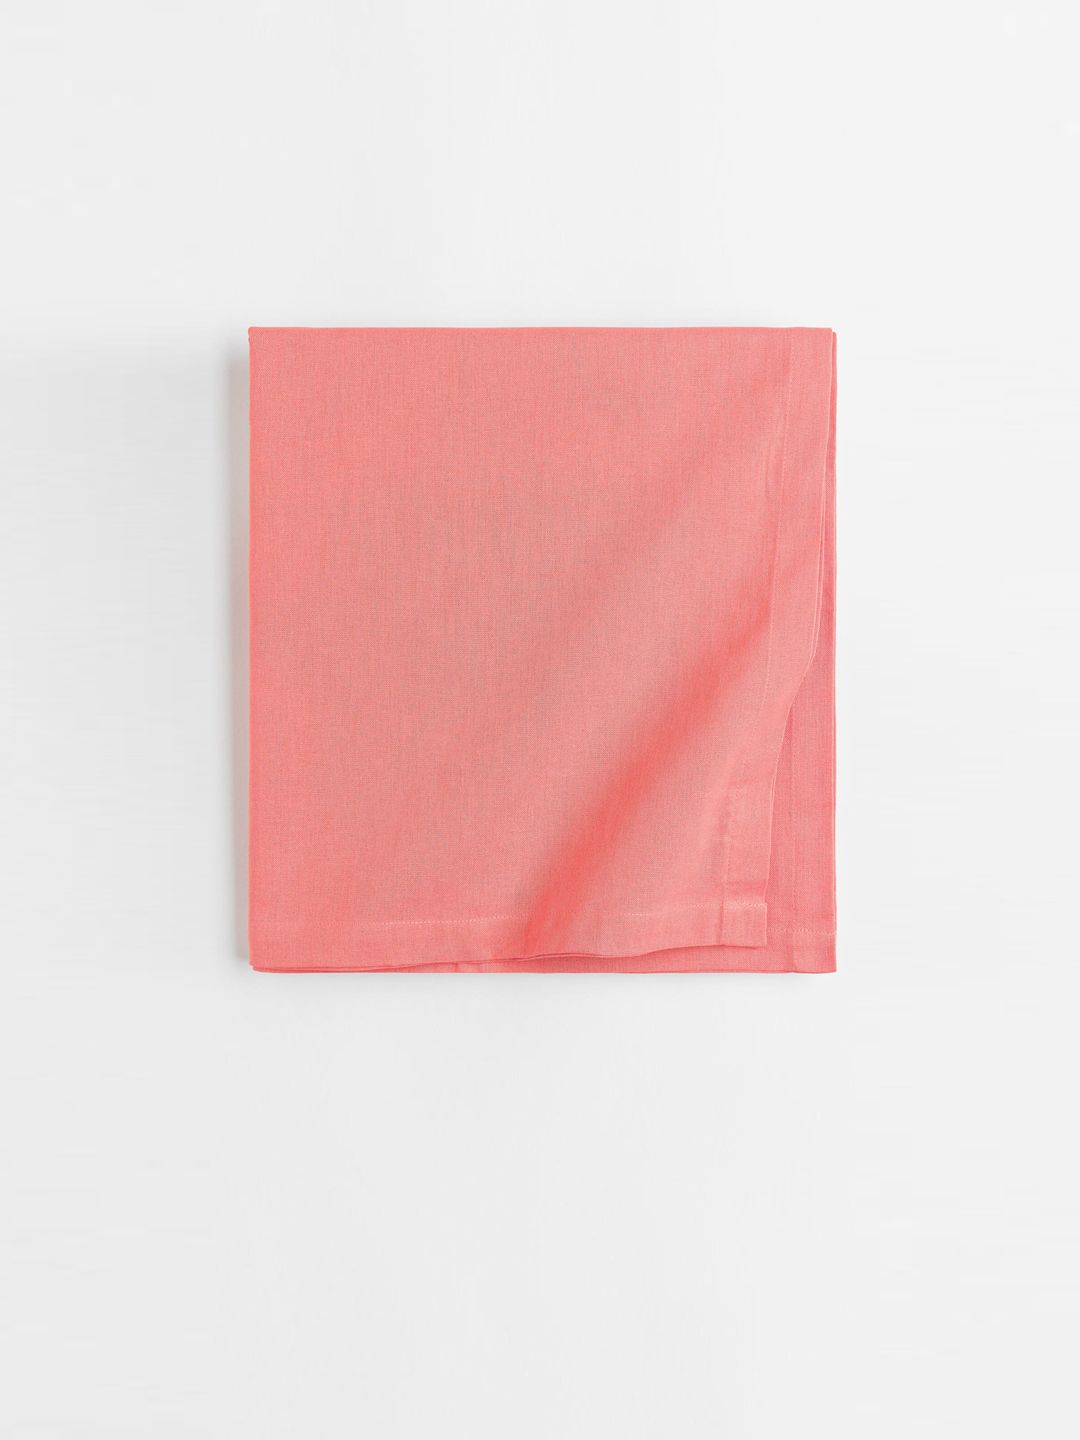 H&M Pink Rectangular Shaped Cotton Tablecloth Price in India